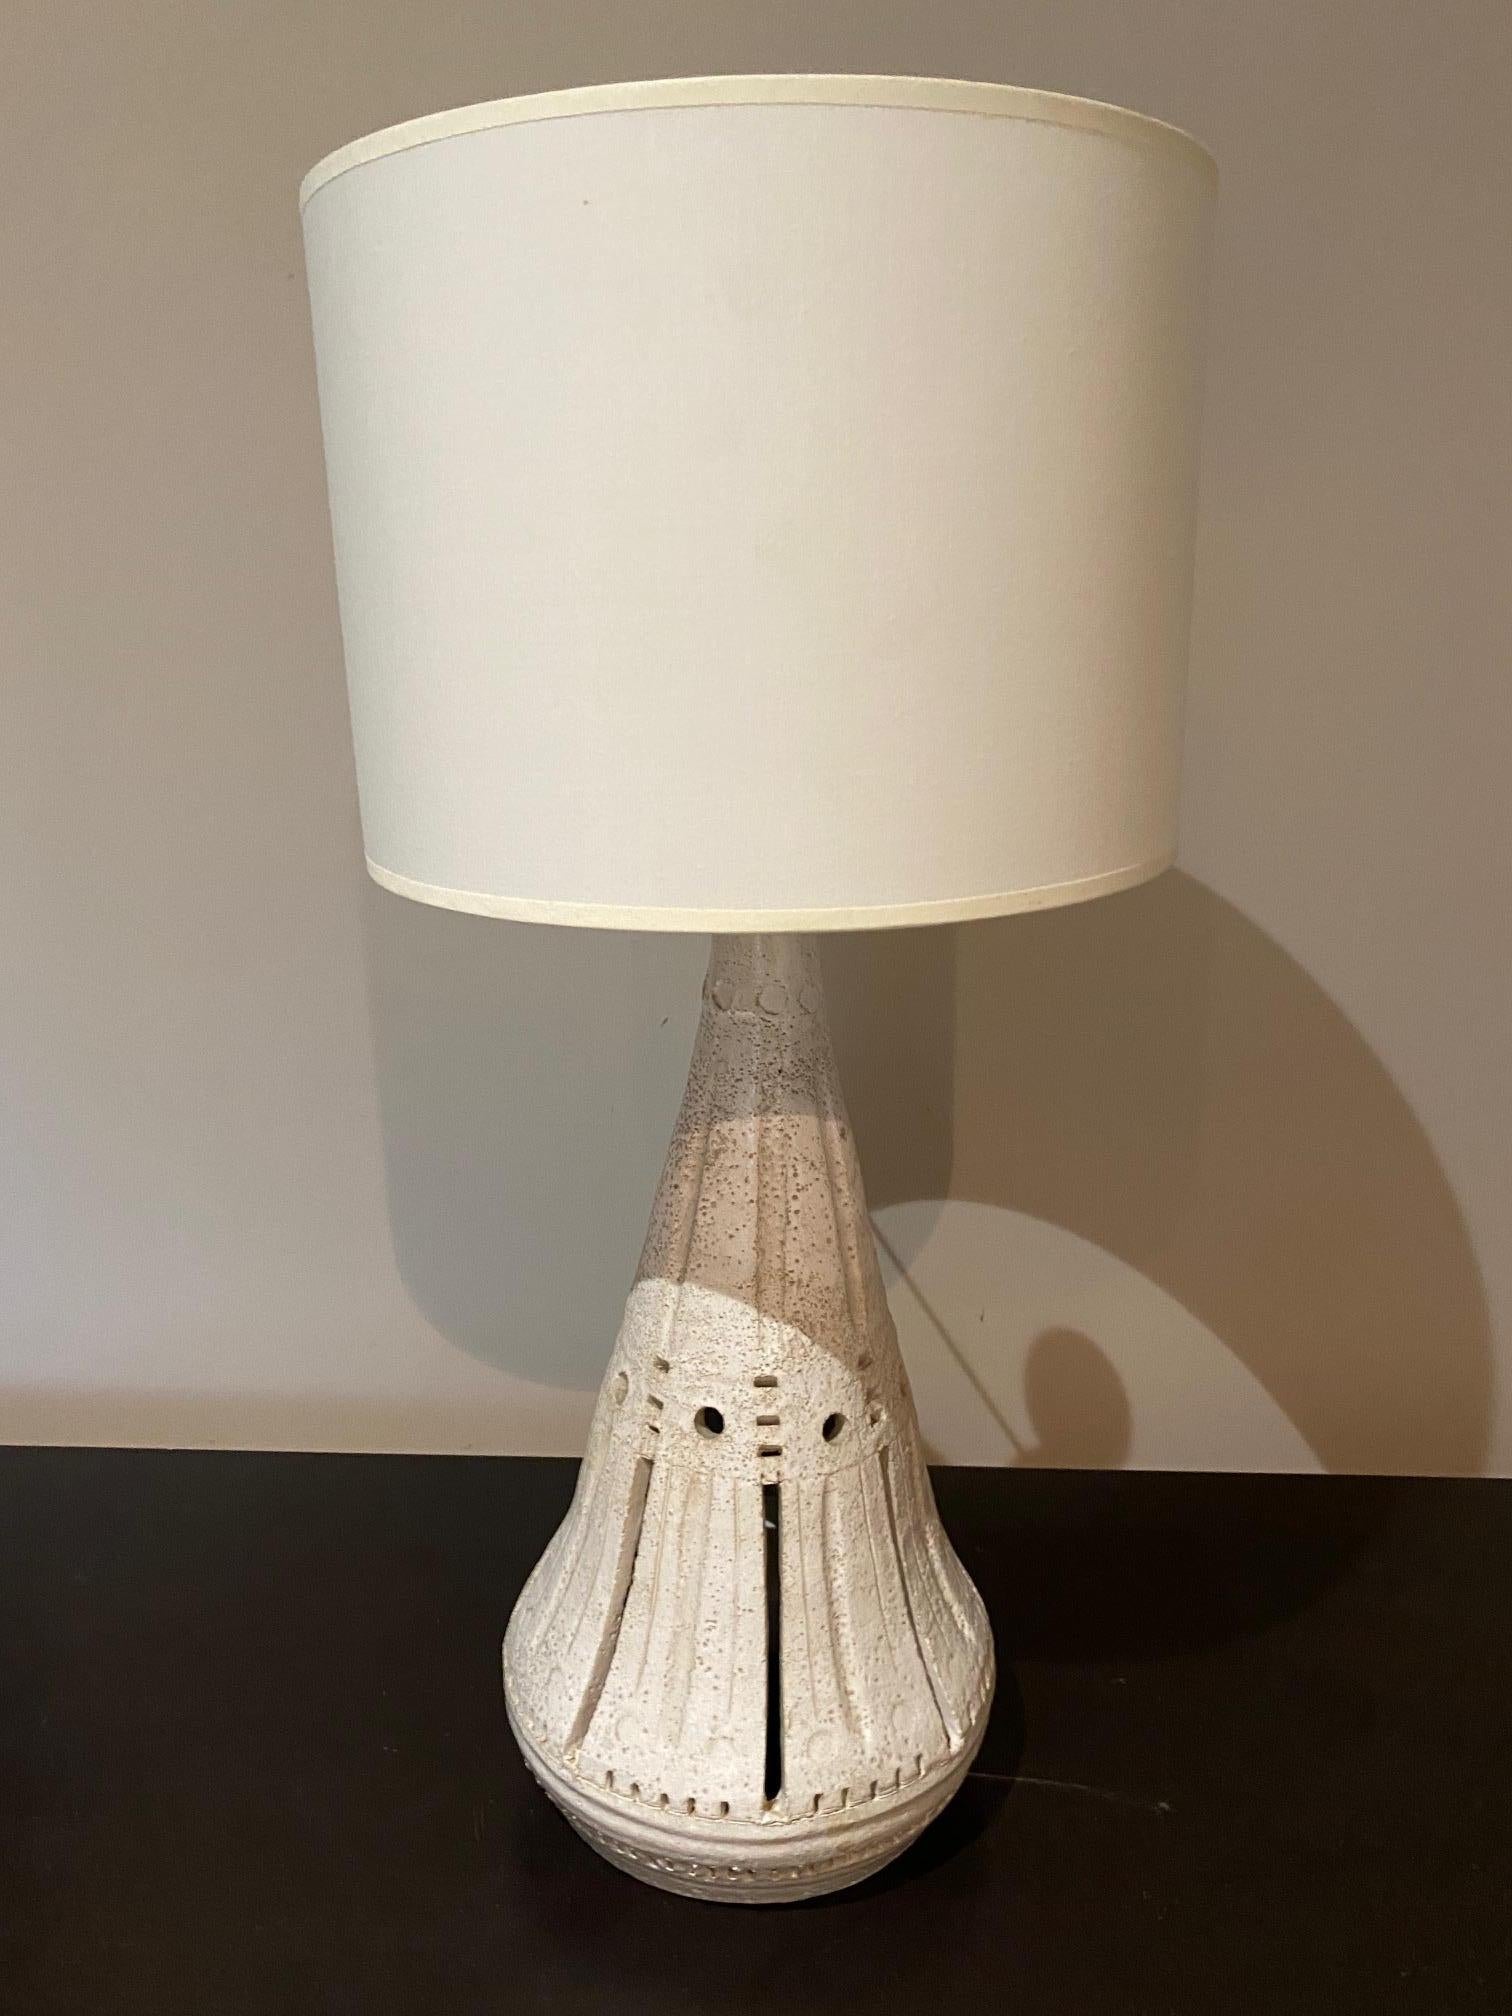 Double-light ceramic lamp in the style of Georges Pelletier Vallauris 1960
Height: 47 cm at the sleeve
Diameter 22cm
Shade: Height 22 cm
Diameter 30cm.